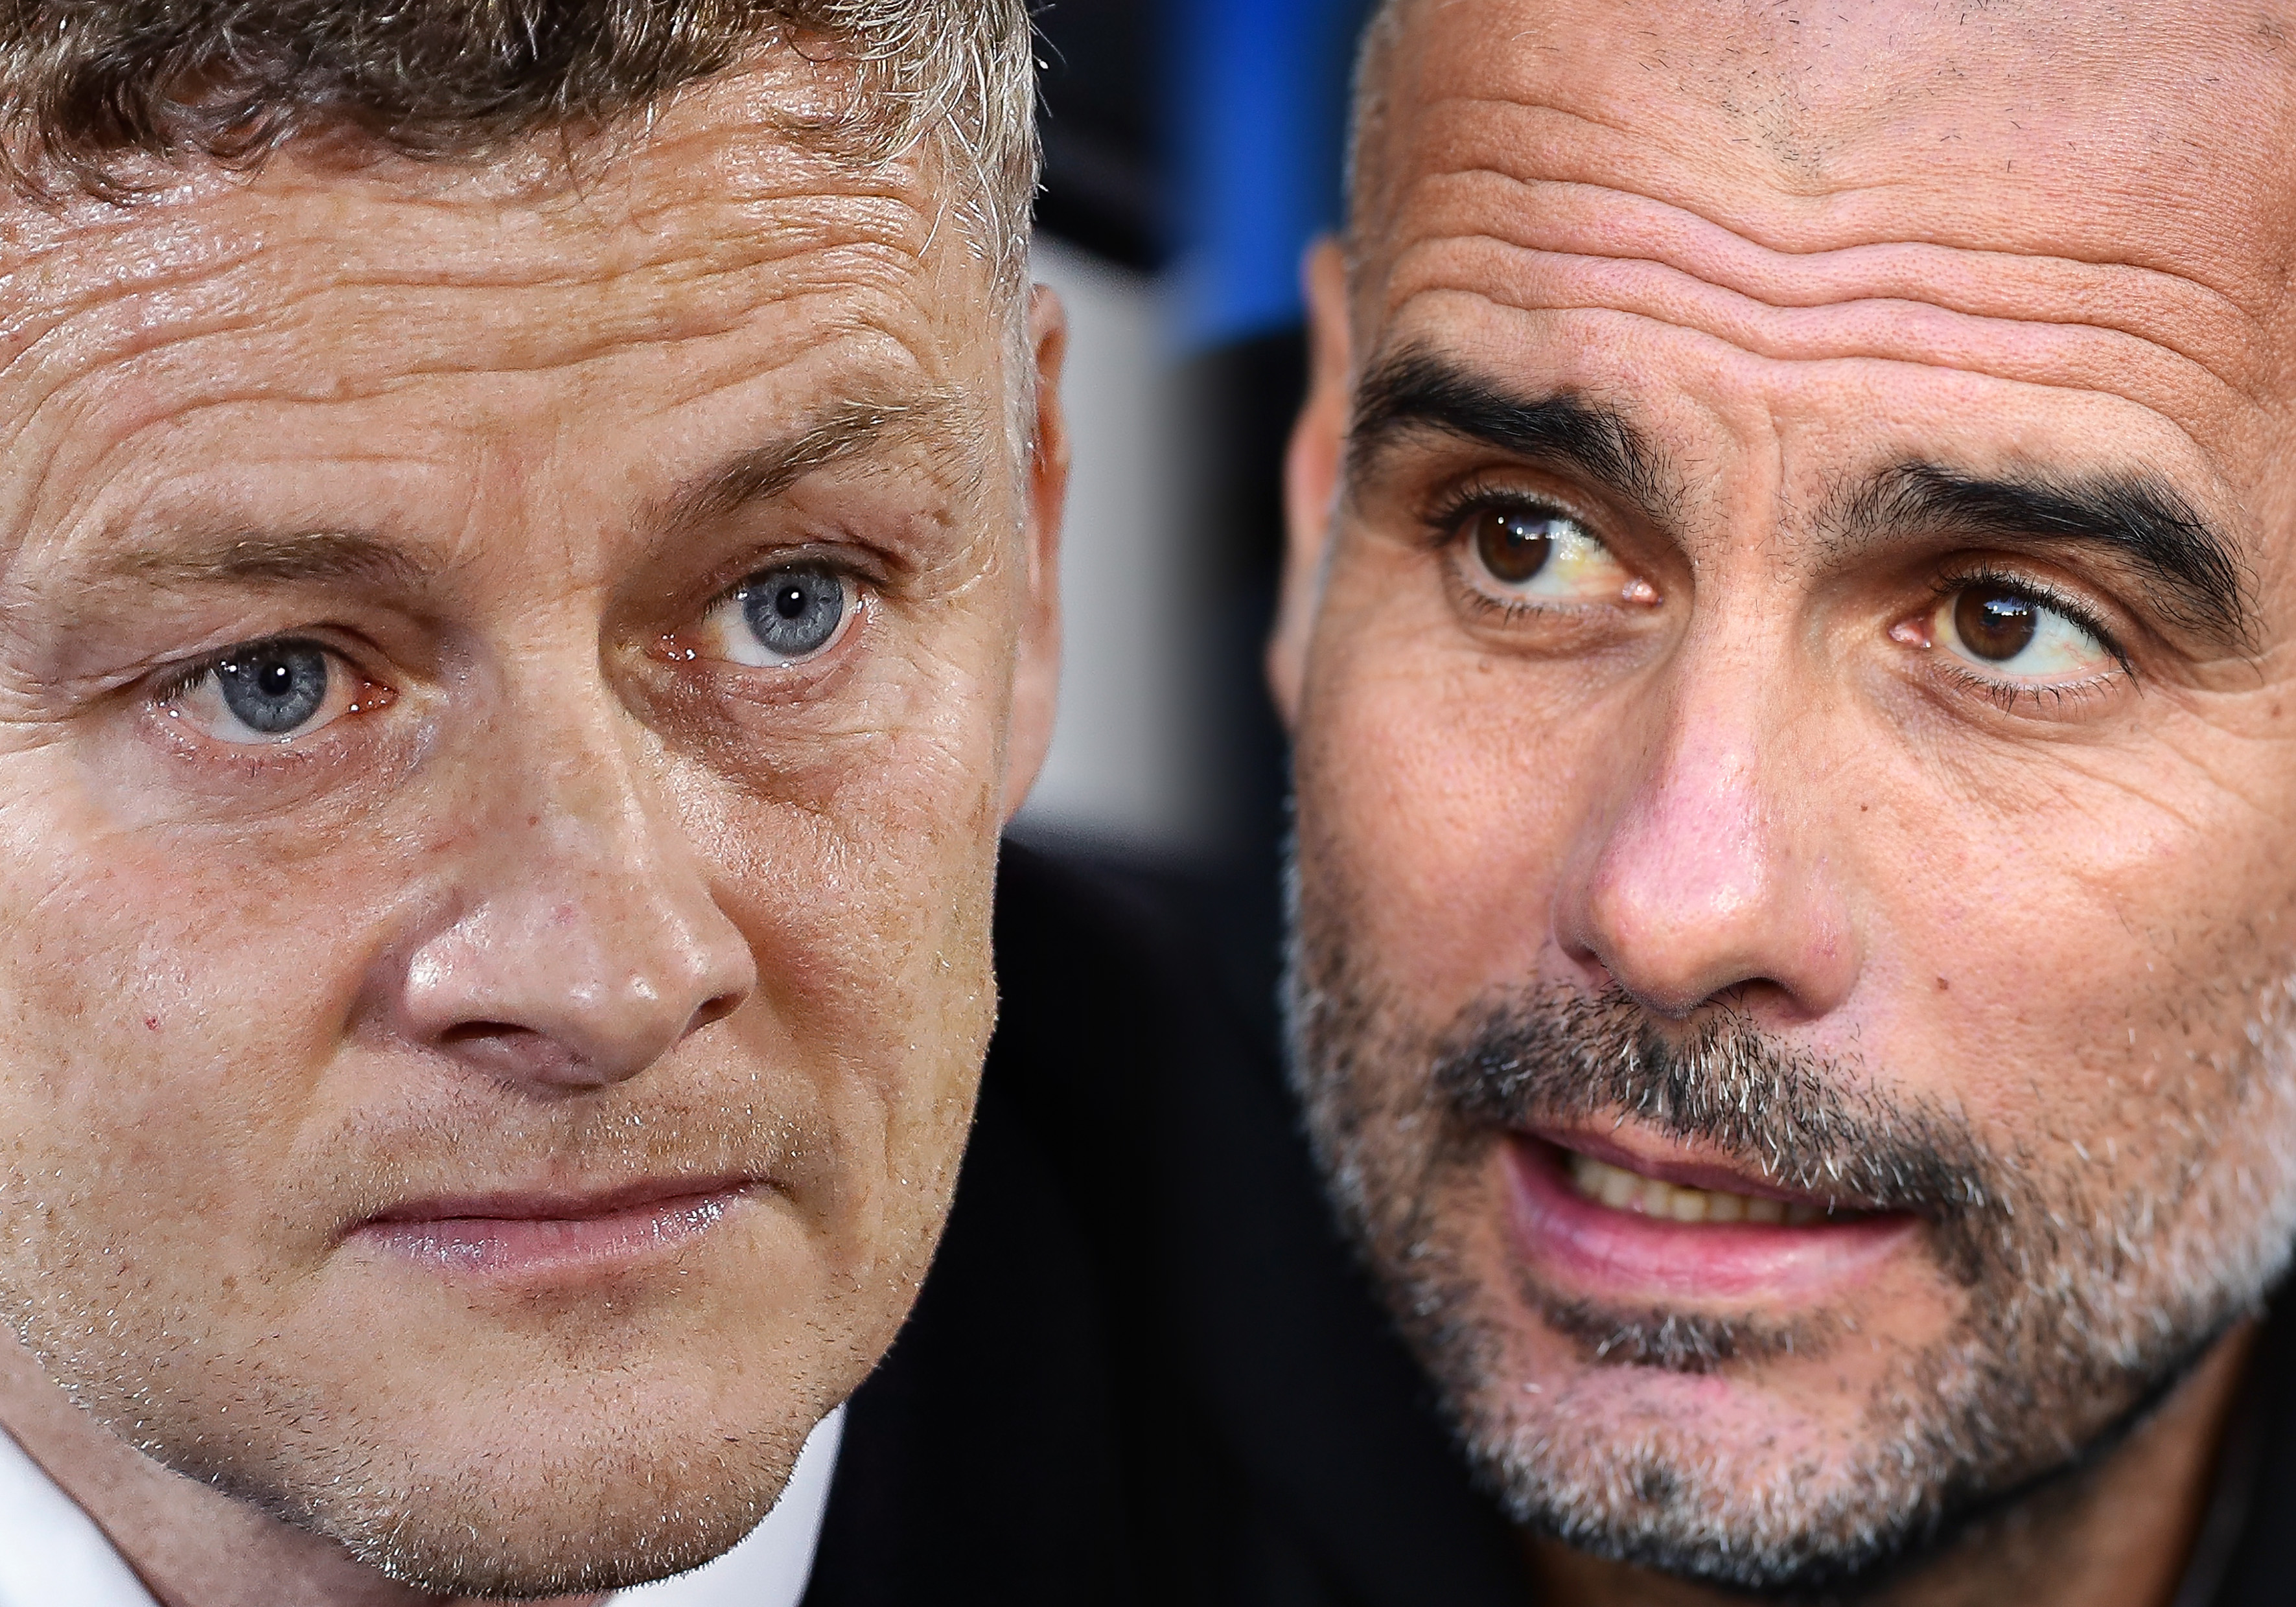 FILE PHOTO (EDITORS NOTE: COMPOSITE OF IMAGES - Image numbers 1177970074,1182084551 - GRADIENT ADDED) In this composite image a comparison has been made between Manager Ole Gunnar Solskjaer of Manchester United (L) and Pep Guardiola, Manager of Manchester City. Manchester United  and Manchester City meet in the first leg of the Carabao Cup Semi Final.   ***LEFT IMAGE*** BELGRADE, SERBIA - OCTOBER 24: Manager Ole Gunnar Solskjaer of Manchester United looks on prior the UEFA Europa League group L match between Partizan and Manchester United at Partizan Stadium on October 24, 2019 in Belgrade, Serbia. (Photo by Srdjan Stevanovic/Getty Images) ***RIGHT IMAGE*** LONDON, ENGLAND - OCTOBER 19: Pep Guardiola, Manager of Manchester City looks on ahead of the Premier League match between Crystal Palace and Manchester City at Selhurst Park on October 19, 2019 in London, United Kingdom. (Photo by Alex Broadway/Getty Images)